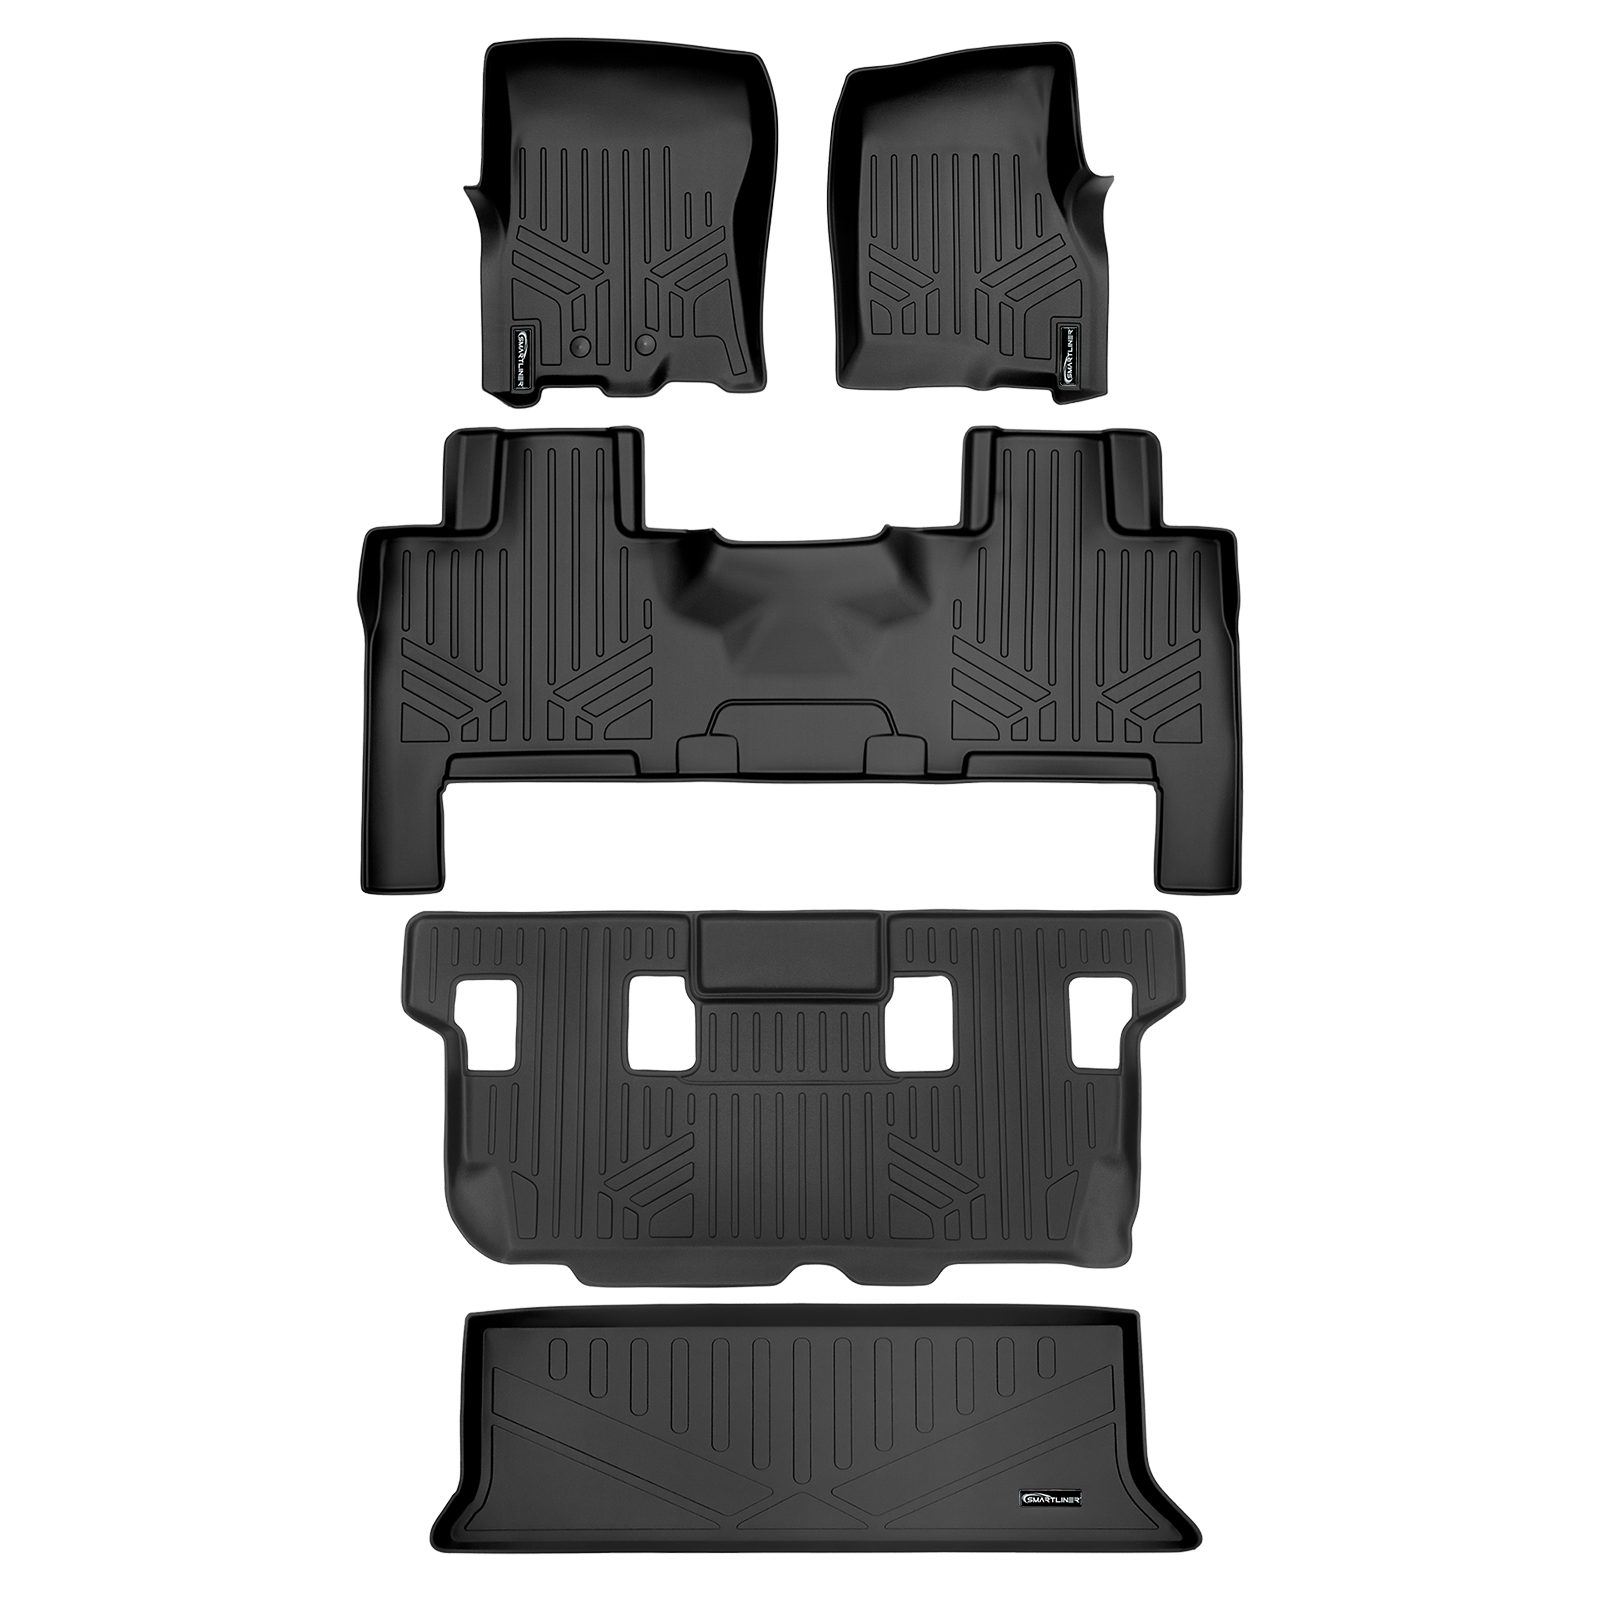 SMARTLINER Custom Fit Floor Liners For 2011-2017 Ford Expedition/Lincoln Navigator with 2nd Row Bench Seat or Console